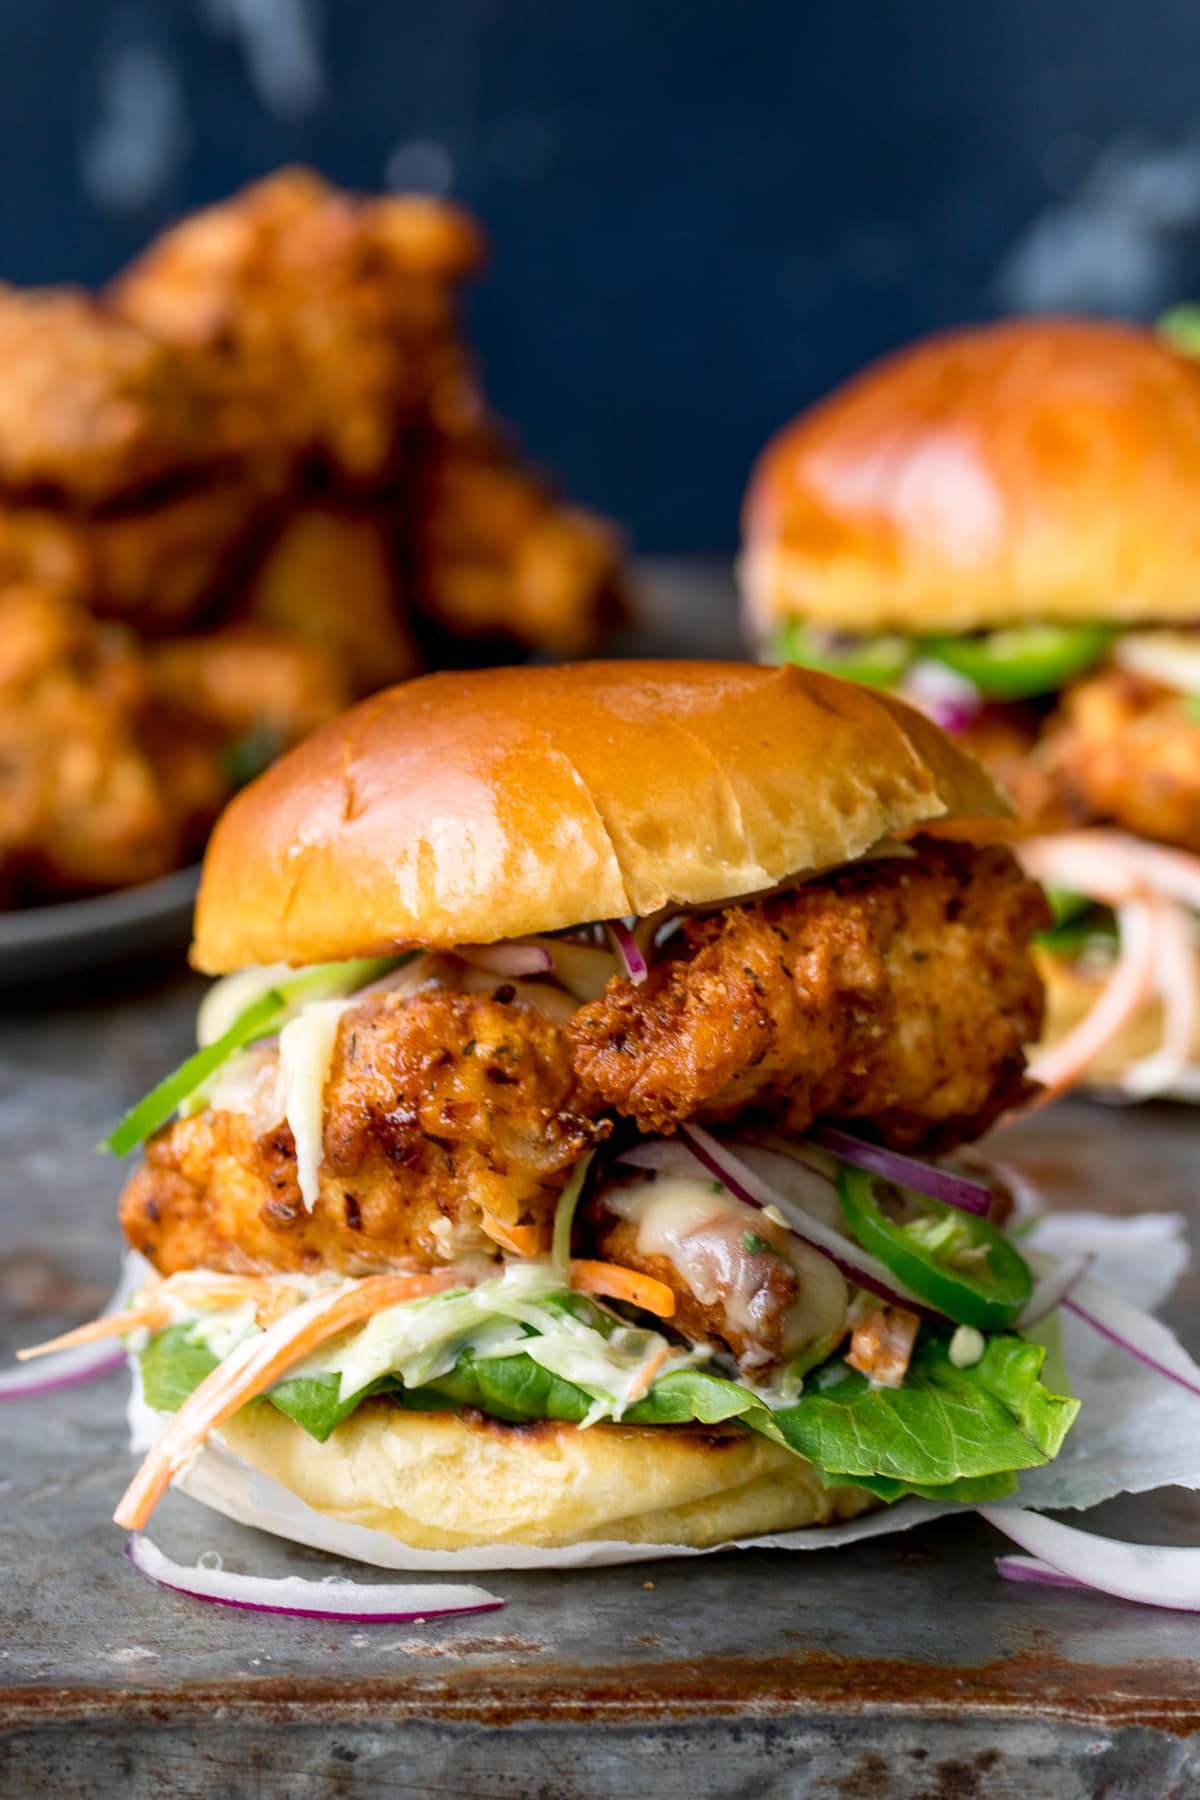 Crispy chicken burger on a brioche bun with lettuce and homemade coleslaw